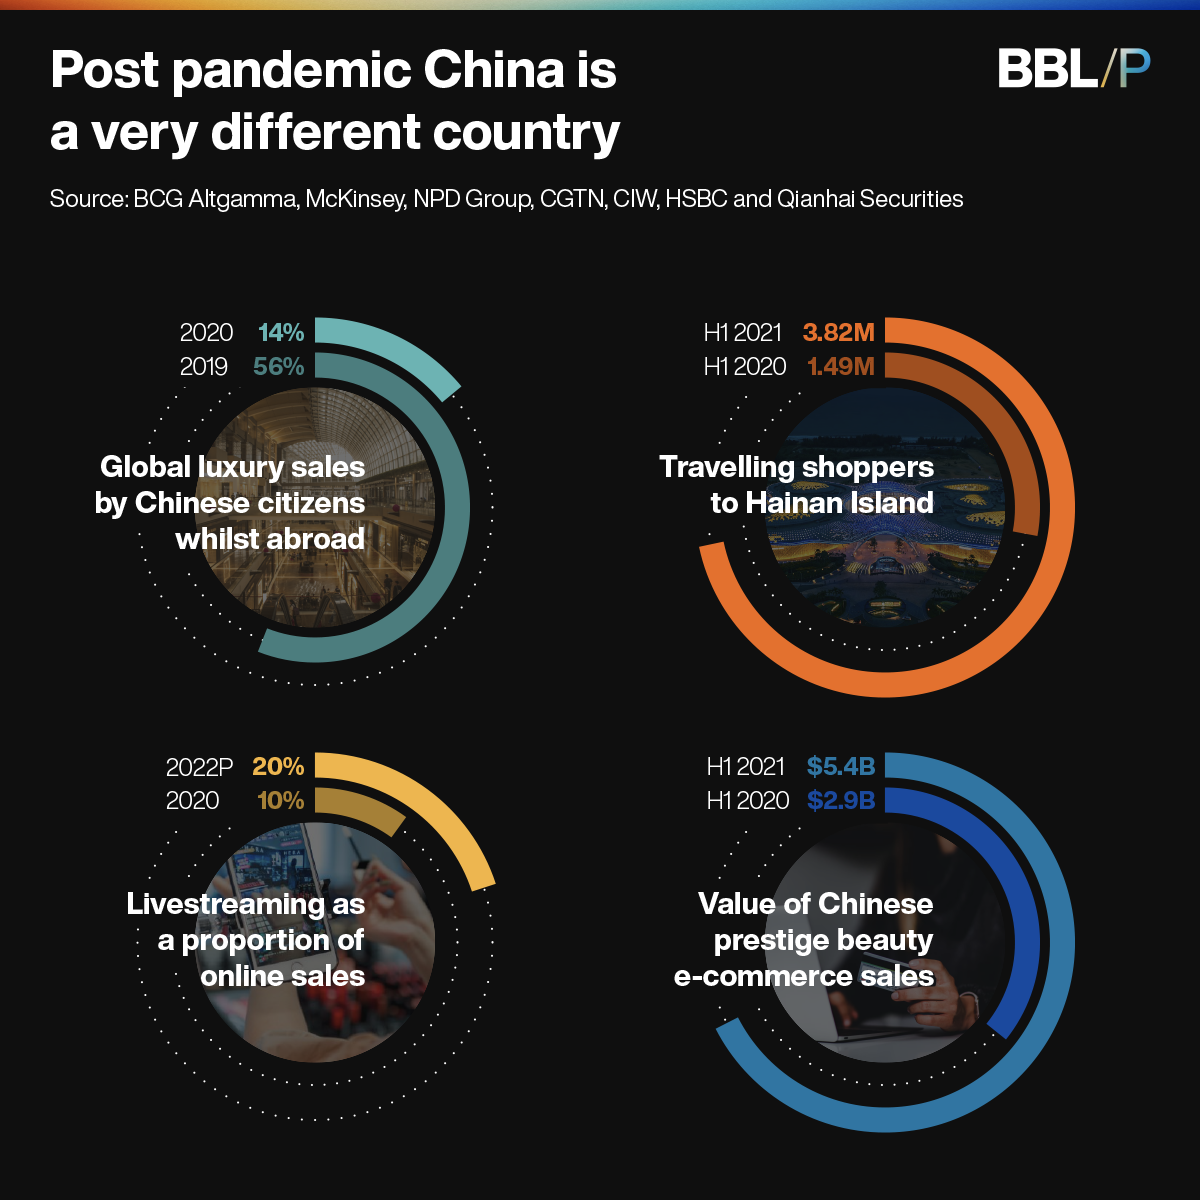 Post pandemic China is a very different country